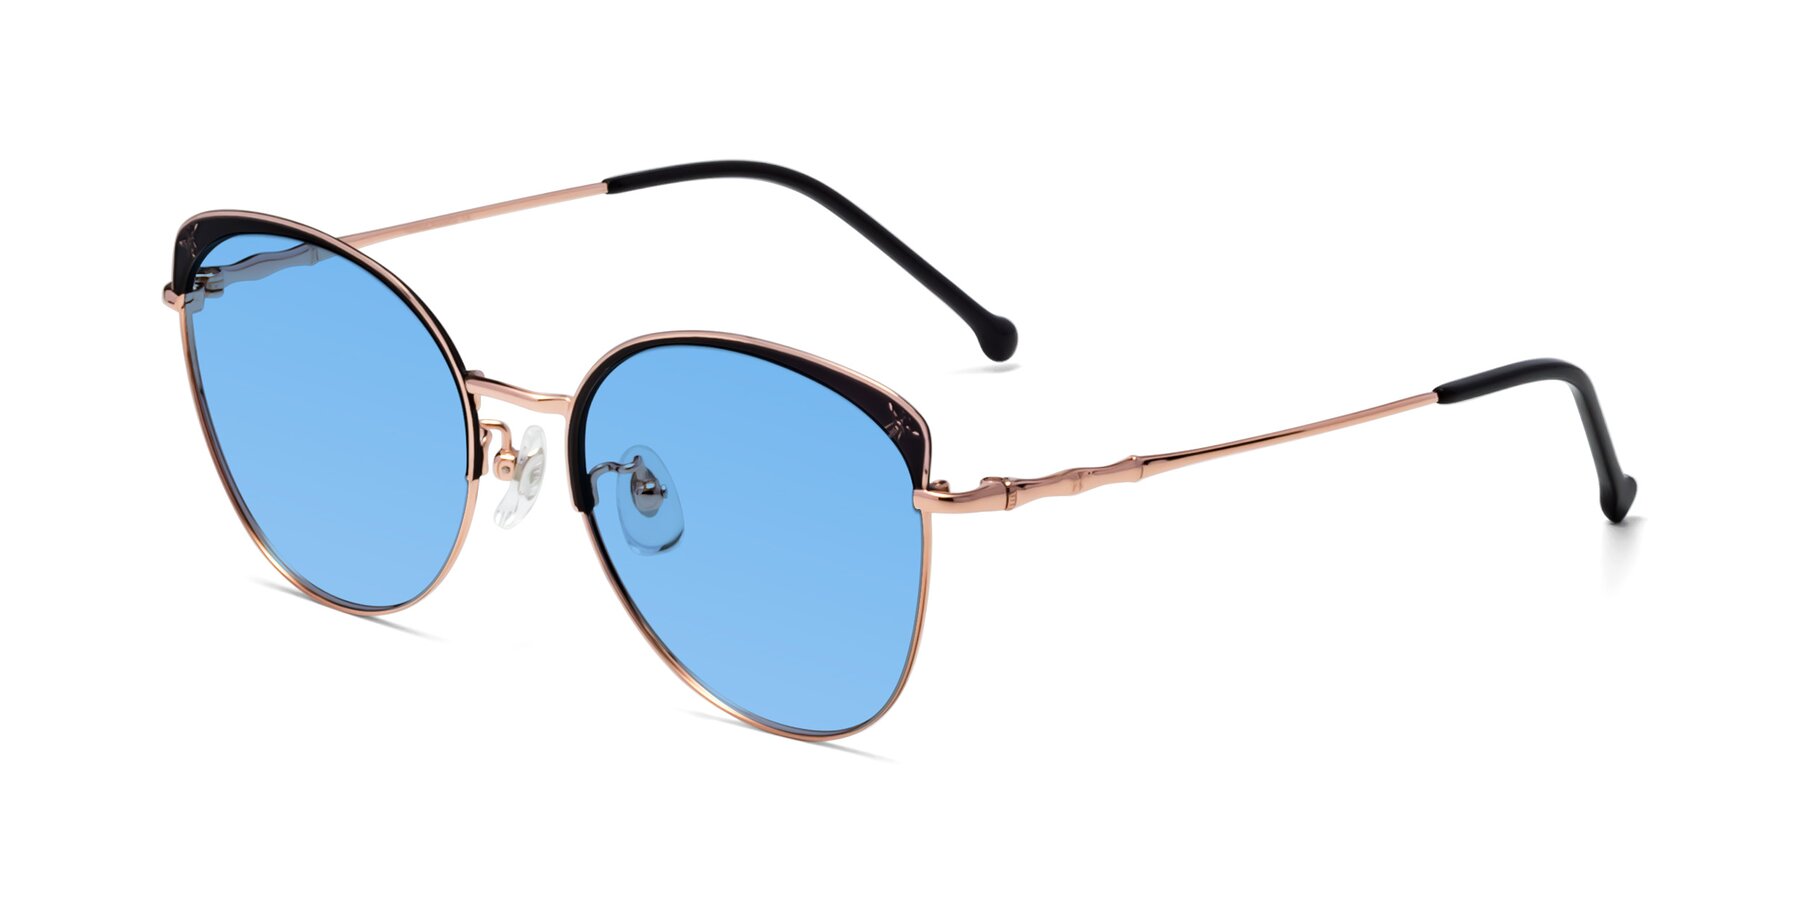 Angle of 18019 in Black-Rose Gold with Medium Blue Tinted Lenses